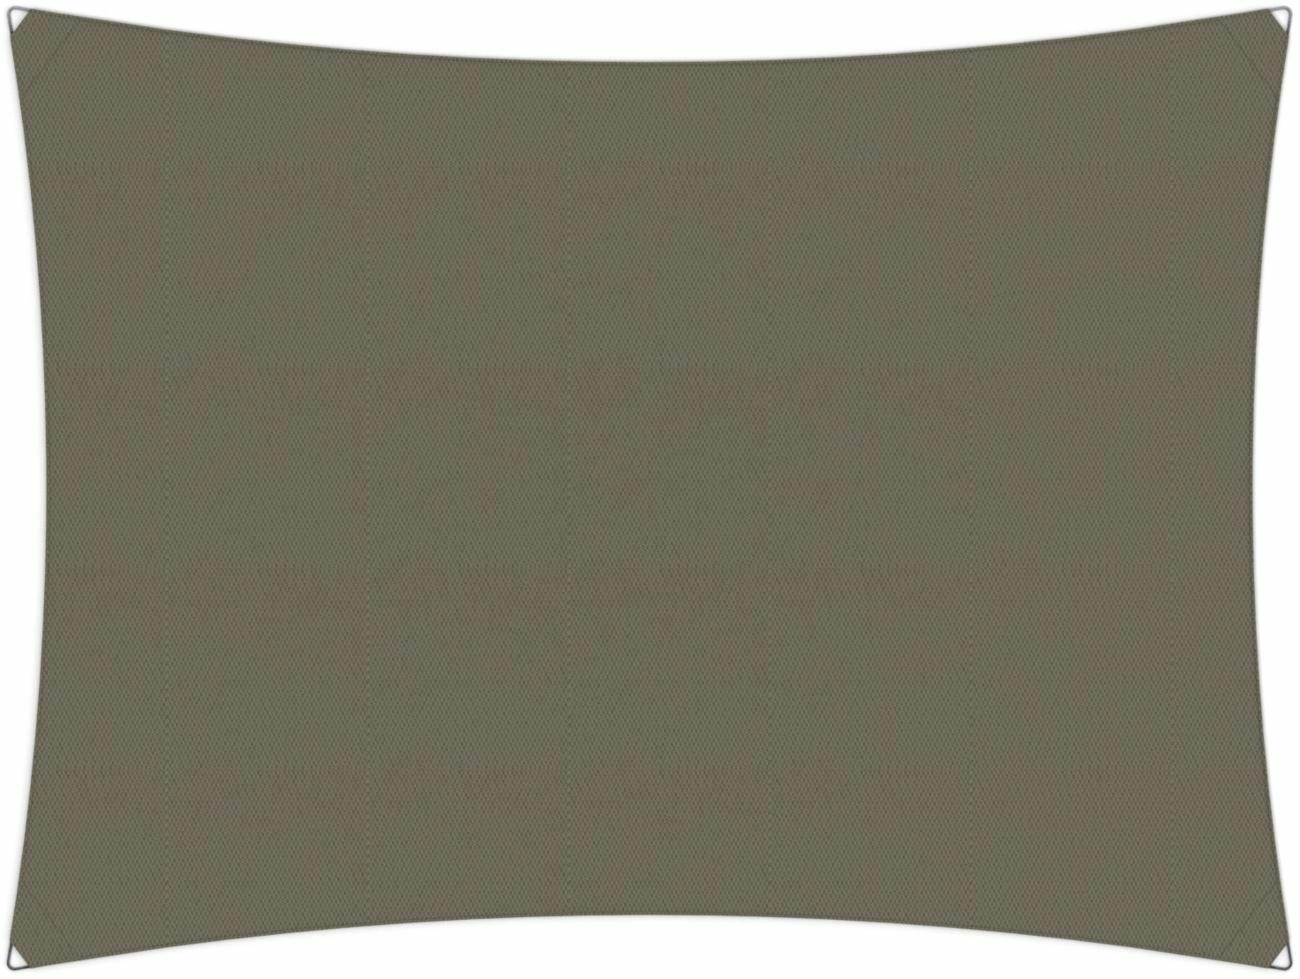 Ingenua shade sail Rectangle 4 x 3 m, for outdoor use. Colour of the fabric shade sail Taupe.